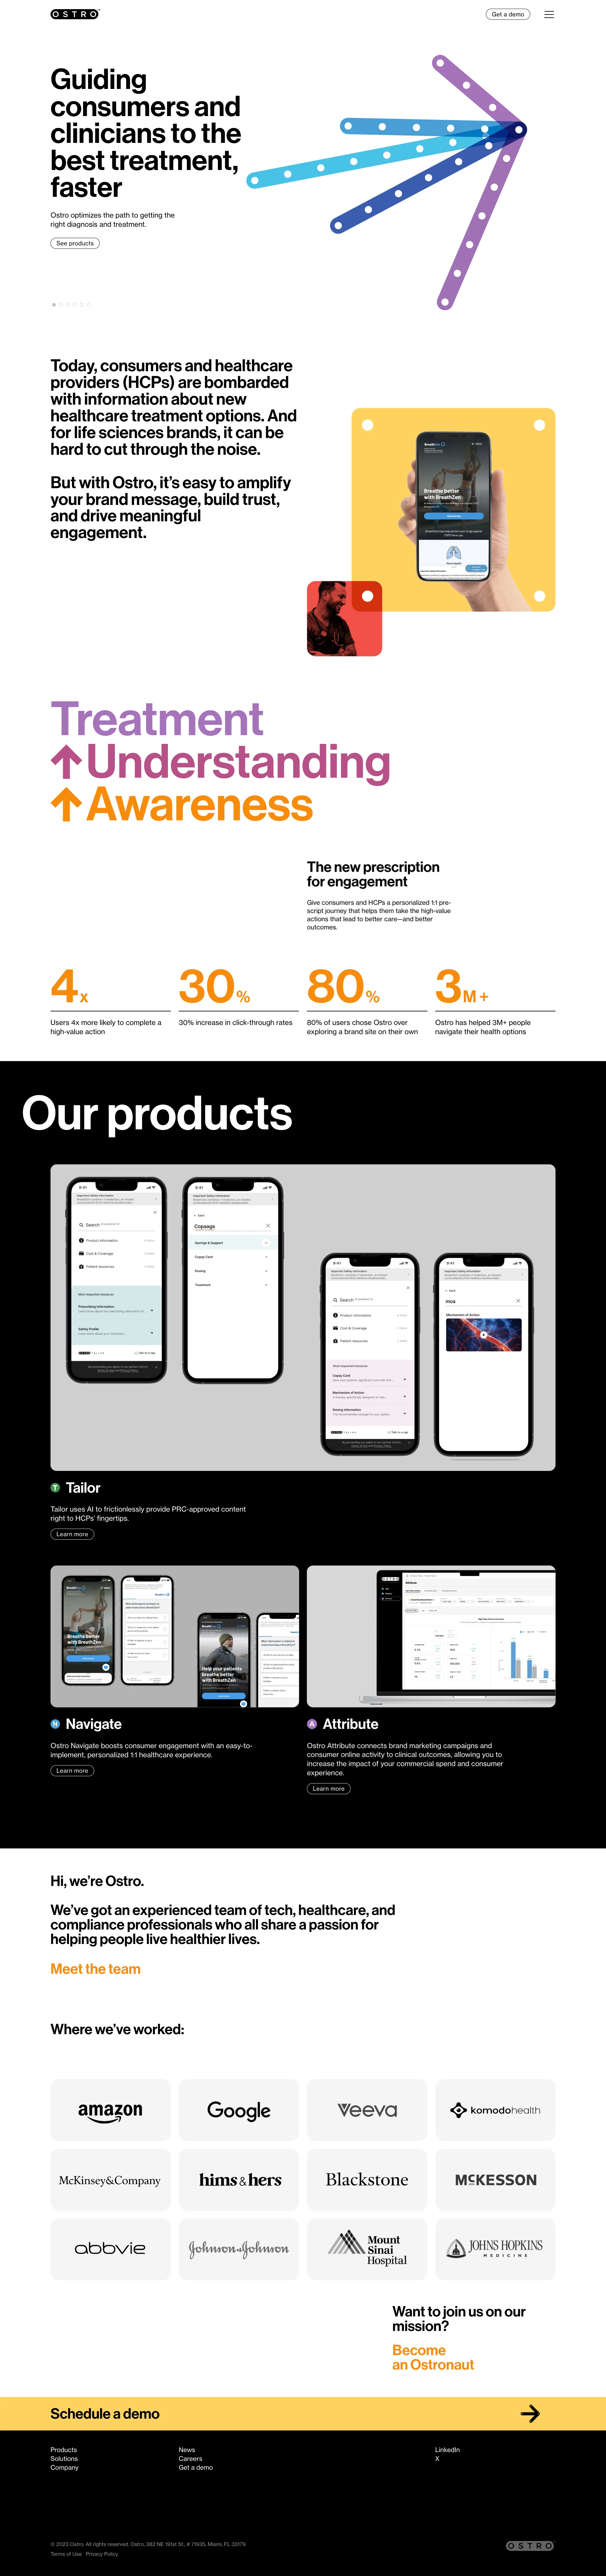 Ostro Landing Page Example: Get to well sooner. Ostro helps consumers and clinicians get the information they need for faster, more sustainable health outcomes.